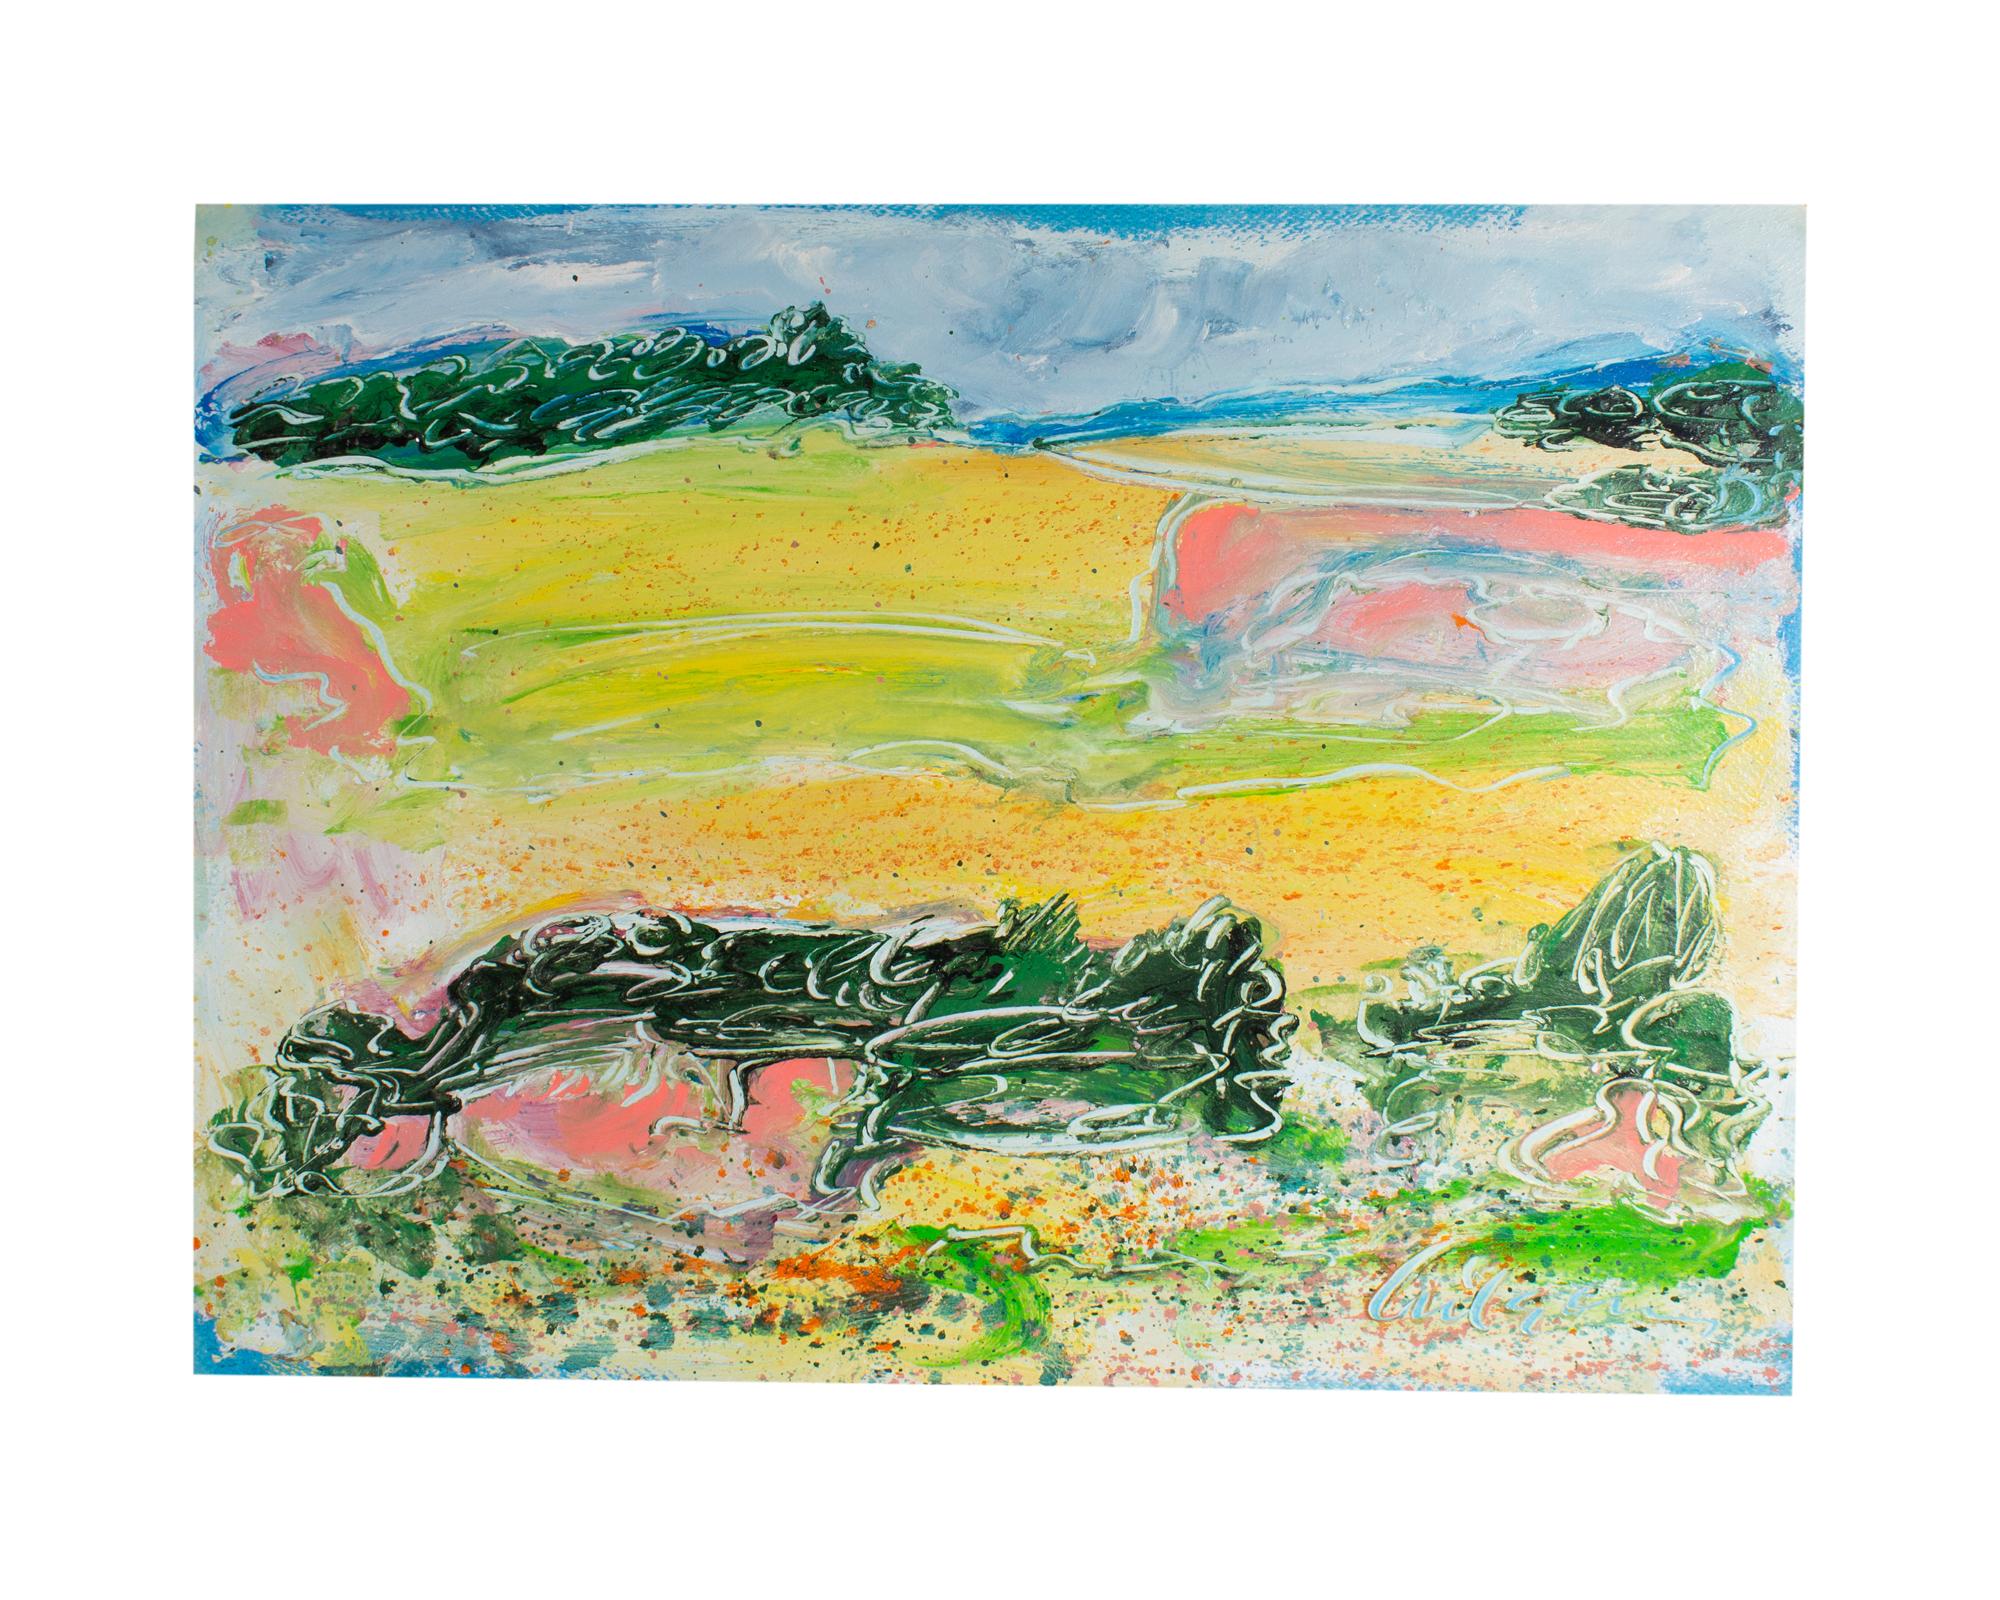 A 1980s acrylic on paper painting by the American artist Harry Hilson (1935-2004). Titled Spring Landscape, this colorful work depicts an abstract landscape replete with distant verdant trees, a pale green and yellow meadow, and colorful wildflowers